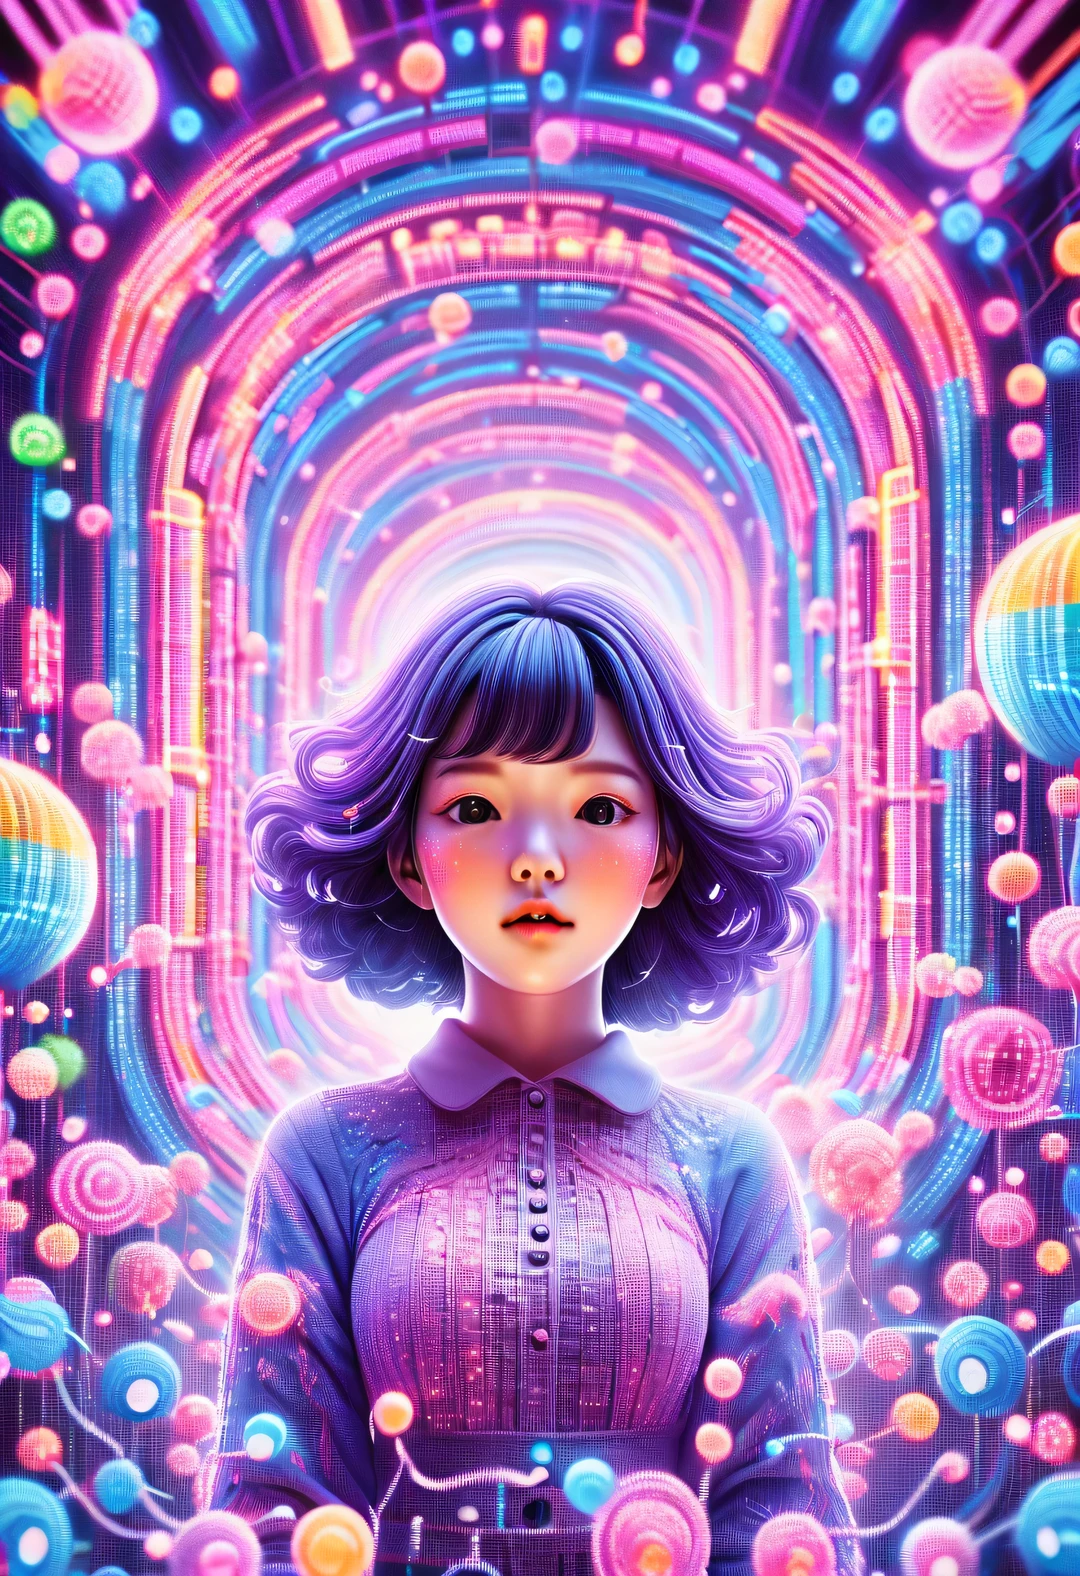 vaporwave style, Beautiful detailed, Vector illustration, Minimalism, digital illustration, Vector illustration，Minimalism，digital illustration，Hacker wearing sweatshirt and mask is working，T-shirt design，dramatic lighting，Art exhibition trends ，Award-winning，icon，Highly detailed cute bubbly Korean girl 18 years old Shim Eun Kyung singing loudly in front of super huge LED screen），（happy），（）Hold the microphone in your hand），（Jumping pose，dynamic action），inspired by《strange her》，Shen Eun-kyung combed her hair into a slightly curly baby style，Very fair skin，，Wearing a purple embroidered lace dress，background：LED screen, dramatic lighting,

